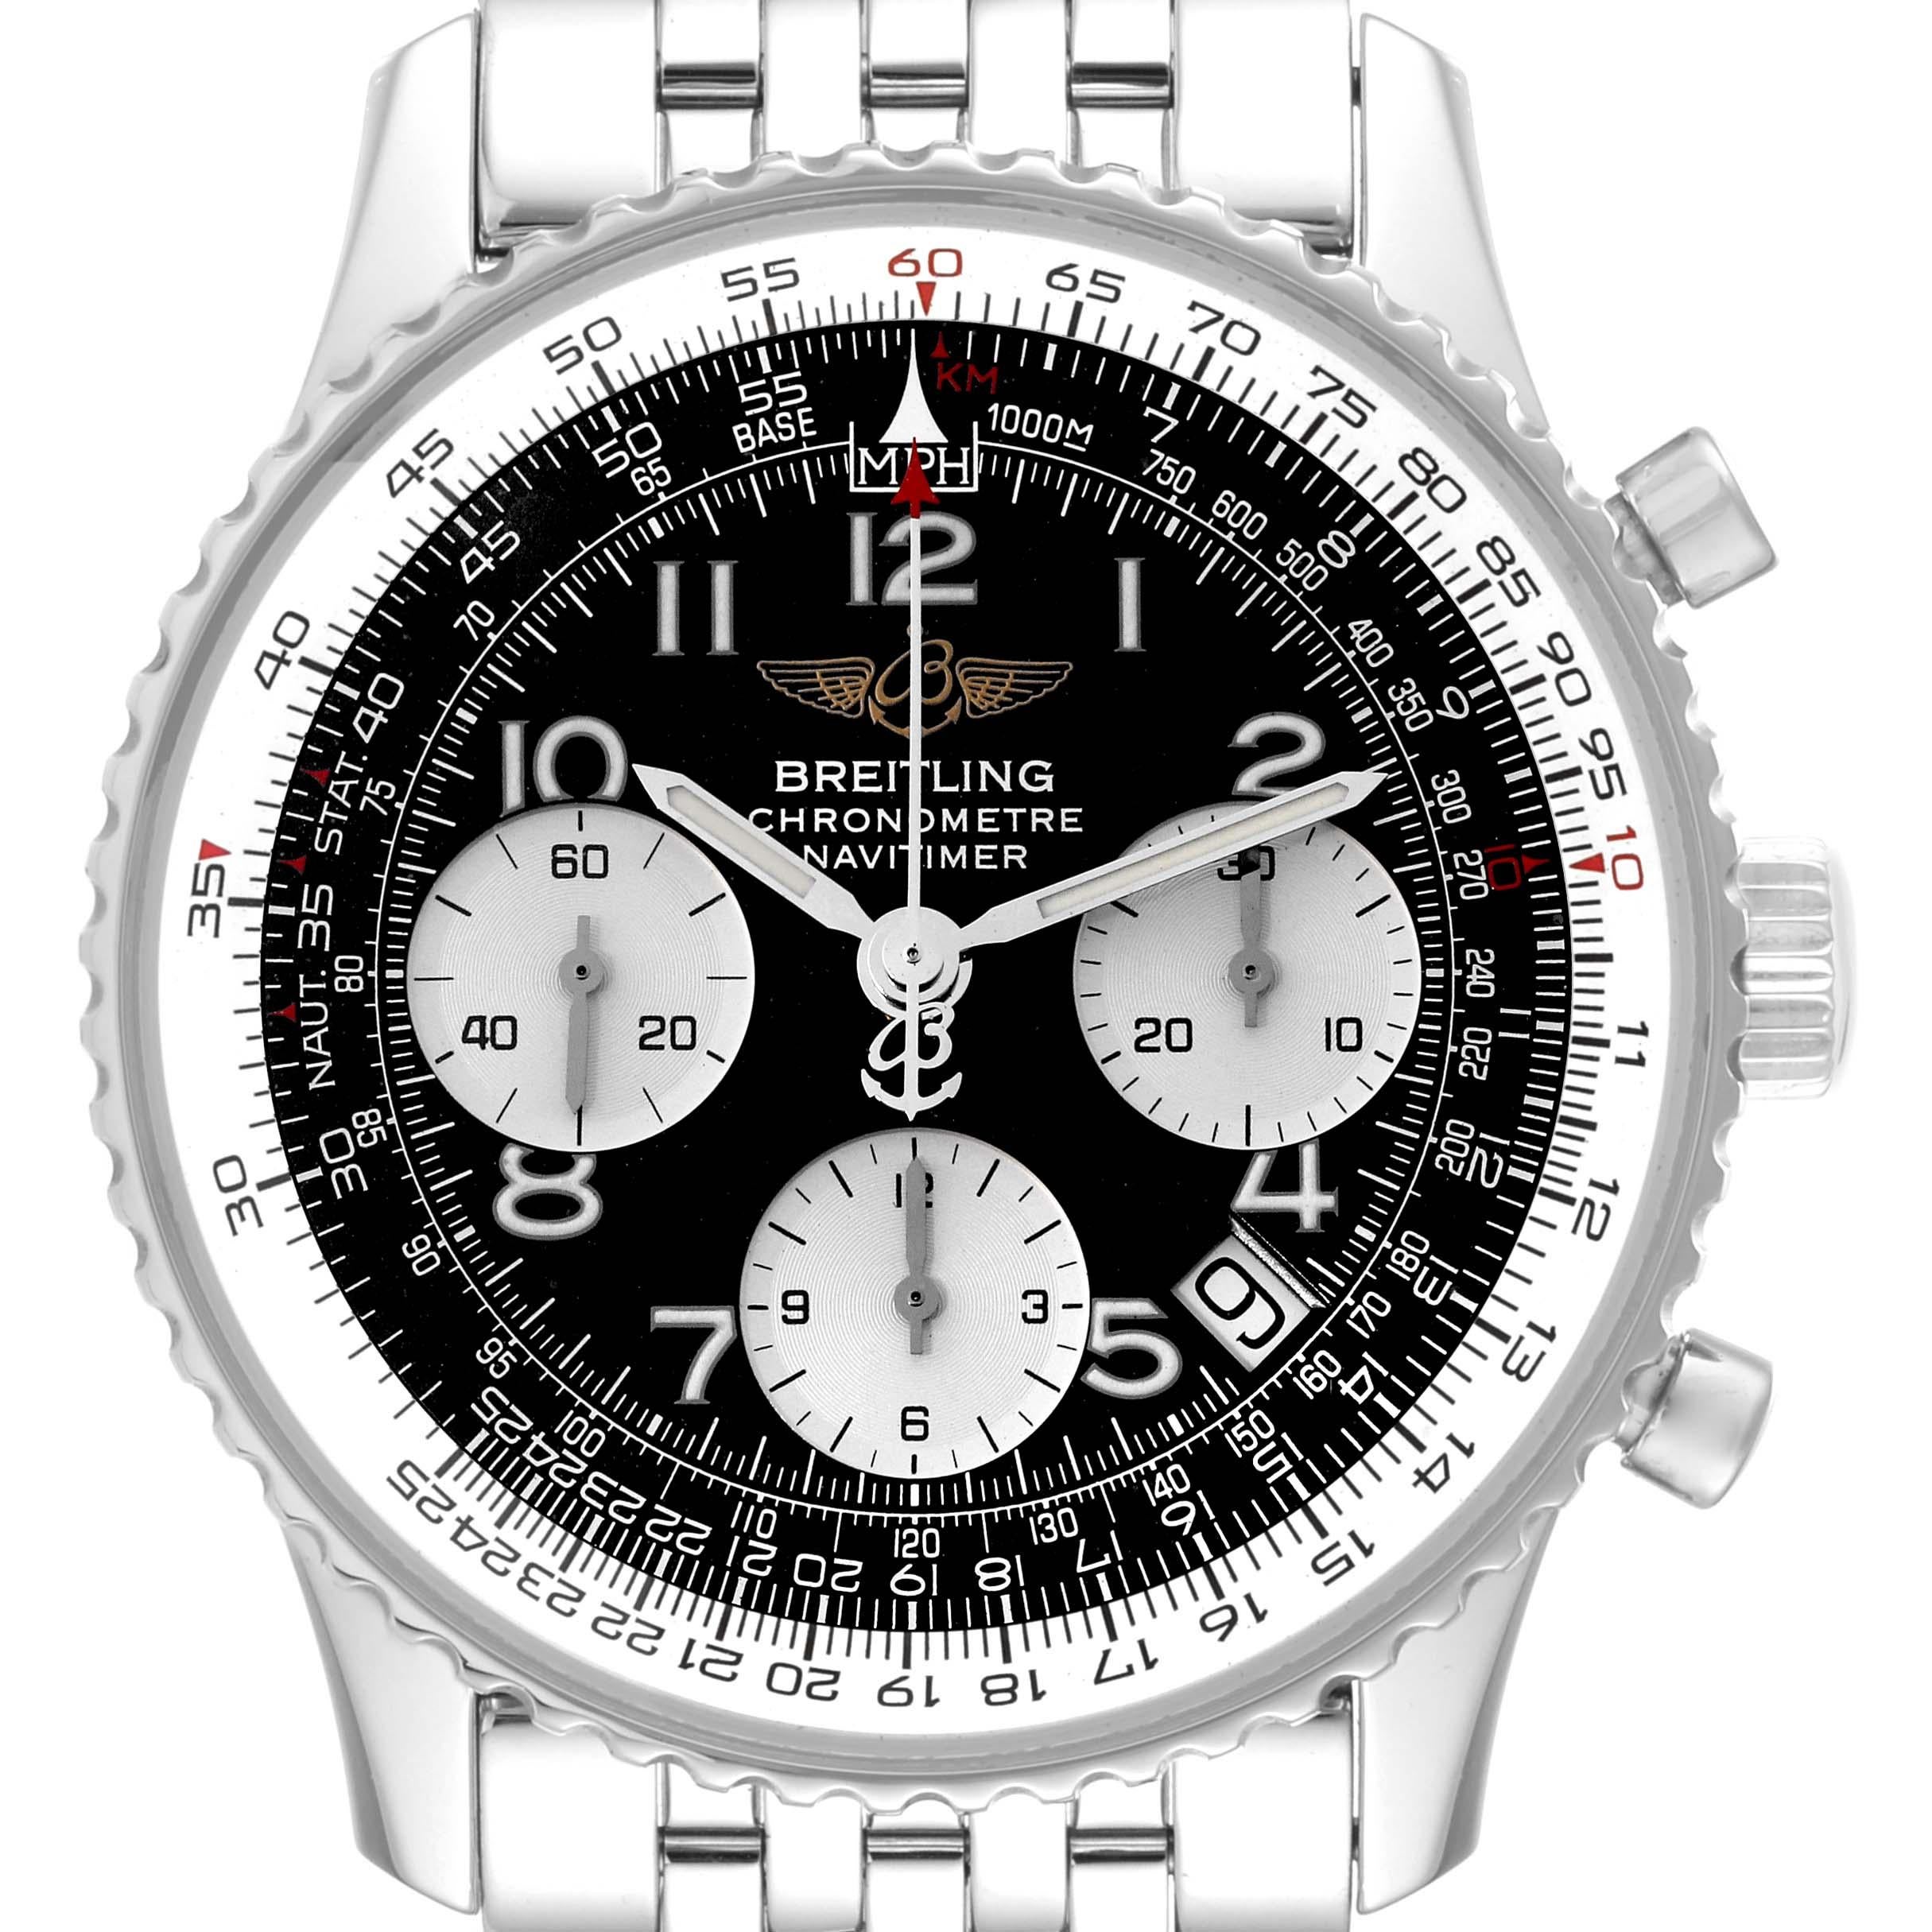 Breitling Navitimer Black Dial Chronograph Steel Mens Watch A23322. Automatic self-winding officially certified chronometer movement. Chronograph function. Rhodium-plated, 25 jewels, straight-line lever escapement, monometallic balance adjusted to 5